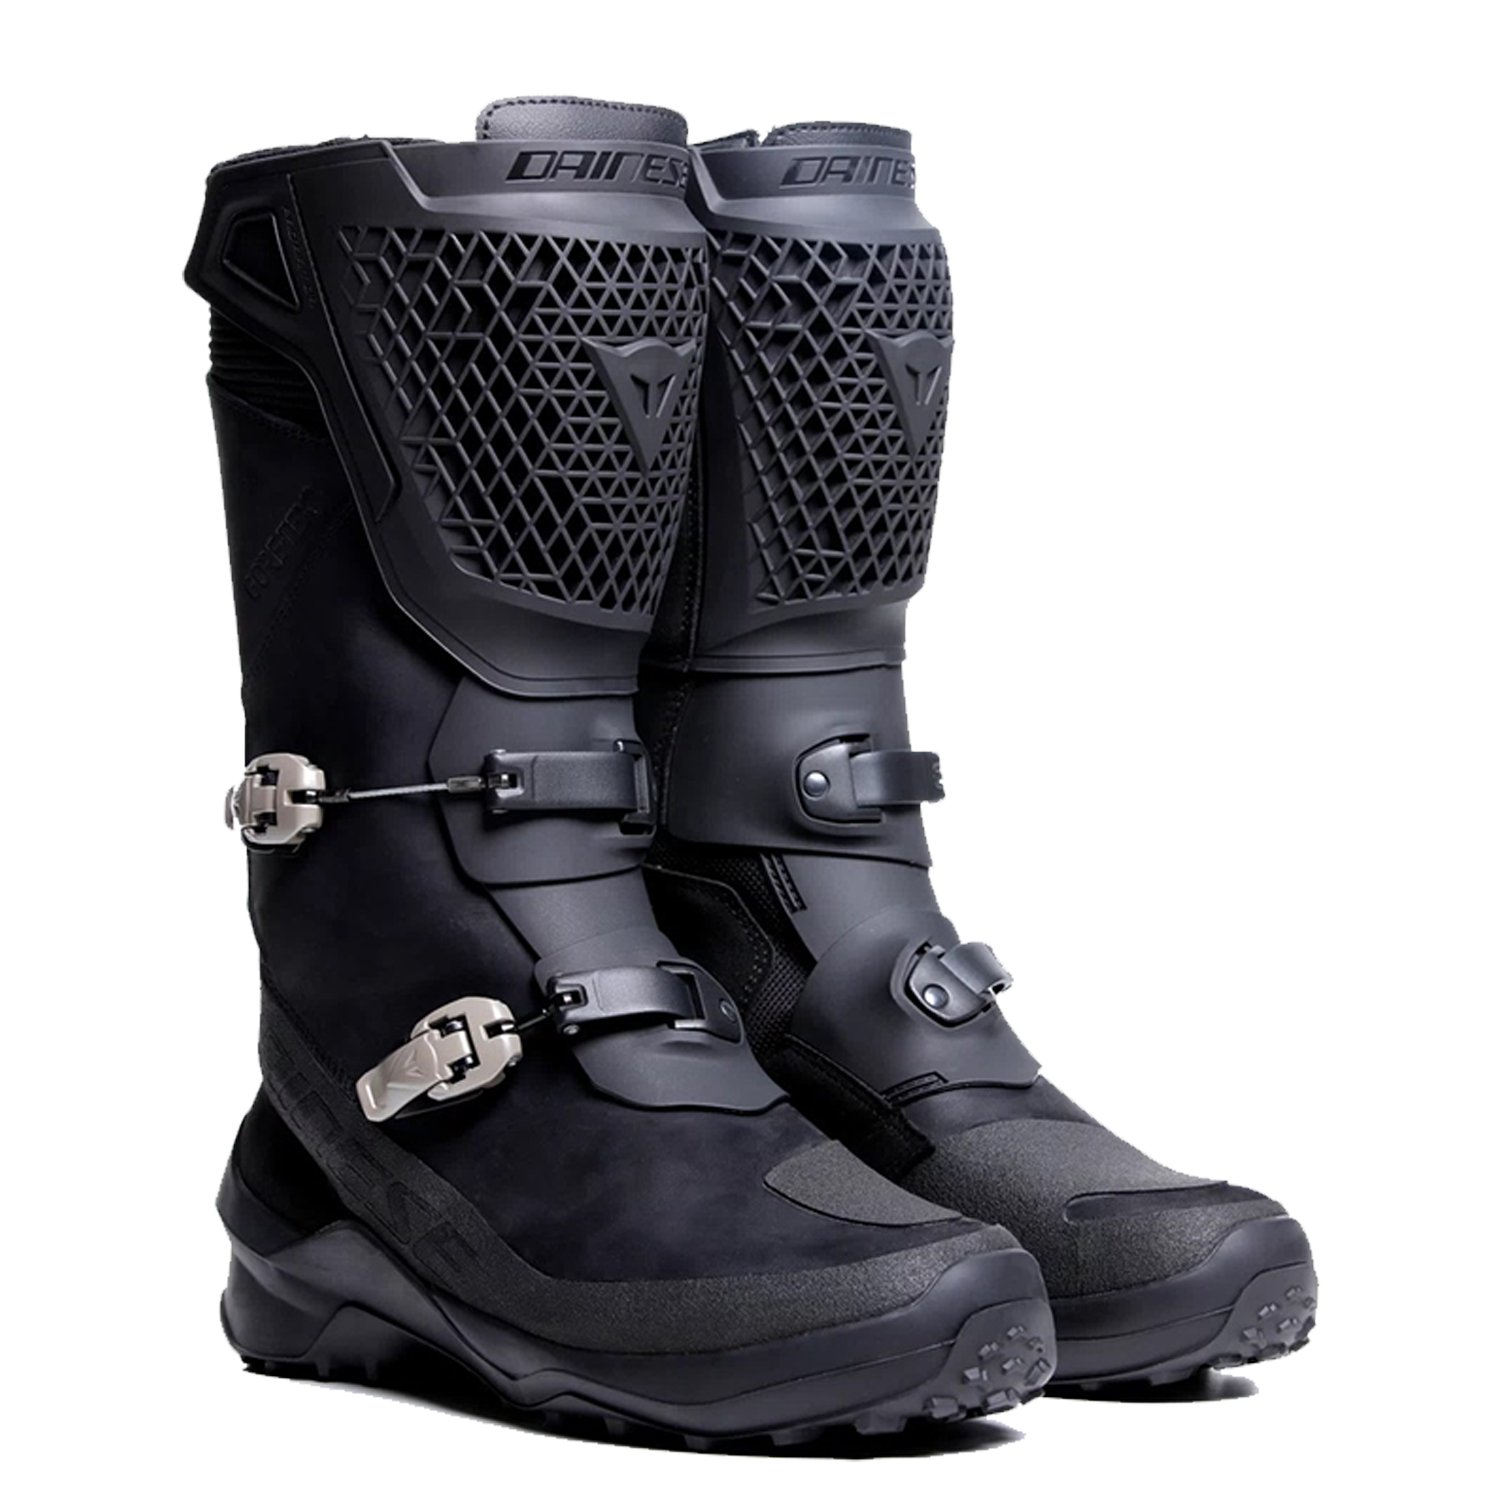 Image of Dainese Seeker Gore-Tex Boots Black Size 45 ID 8051019544421